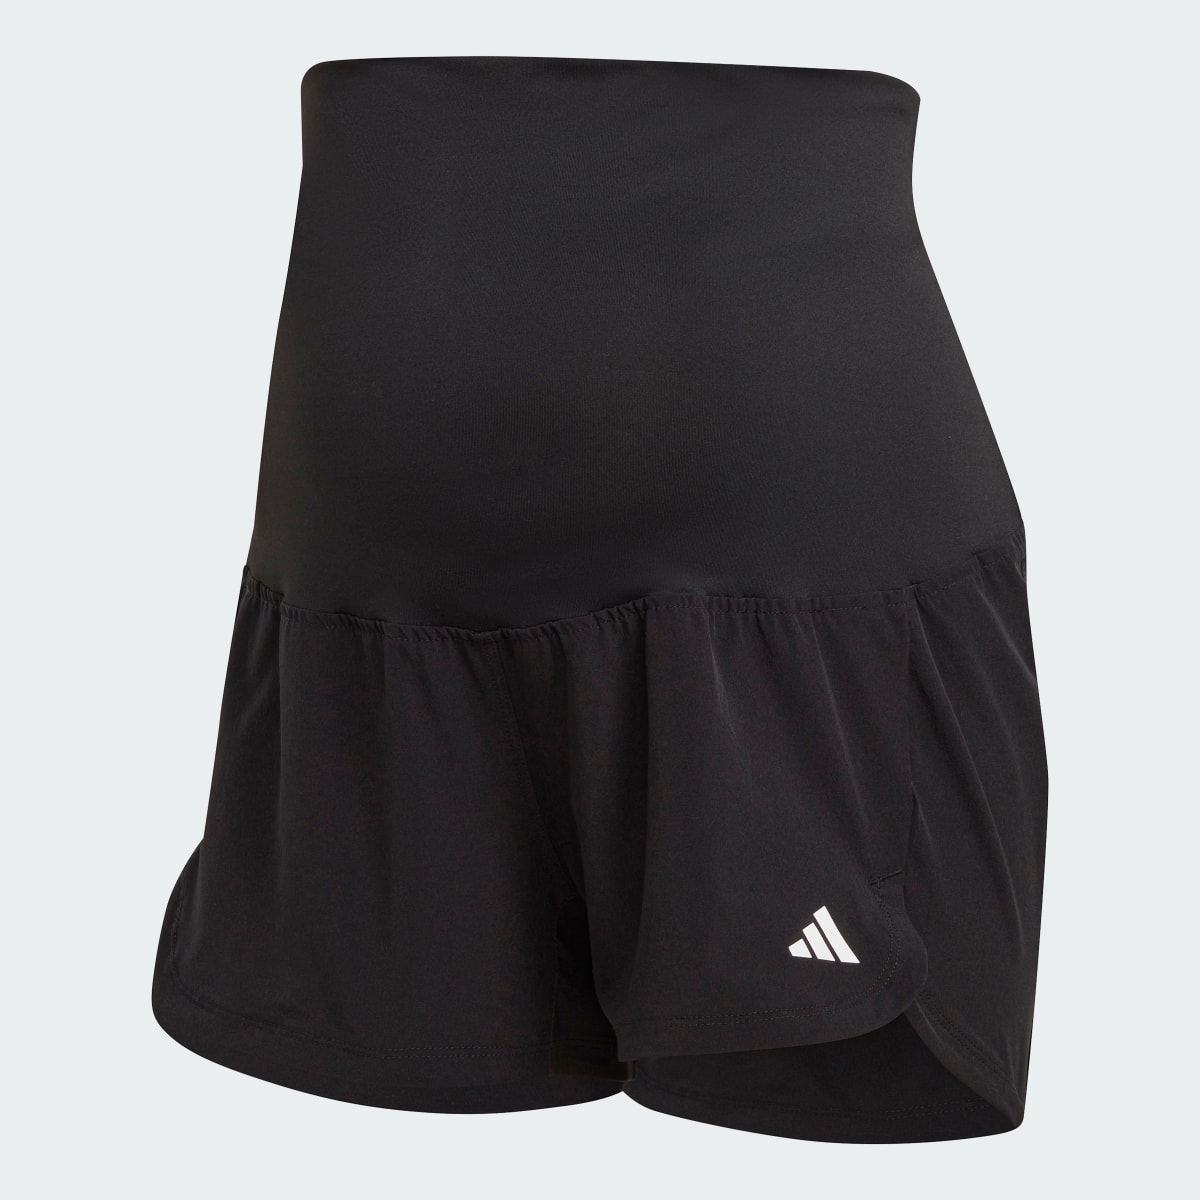 Adidas Pacer Woven Stretch Training Maternity Shorts – Umstandsmode. 5